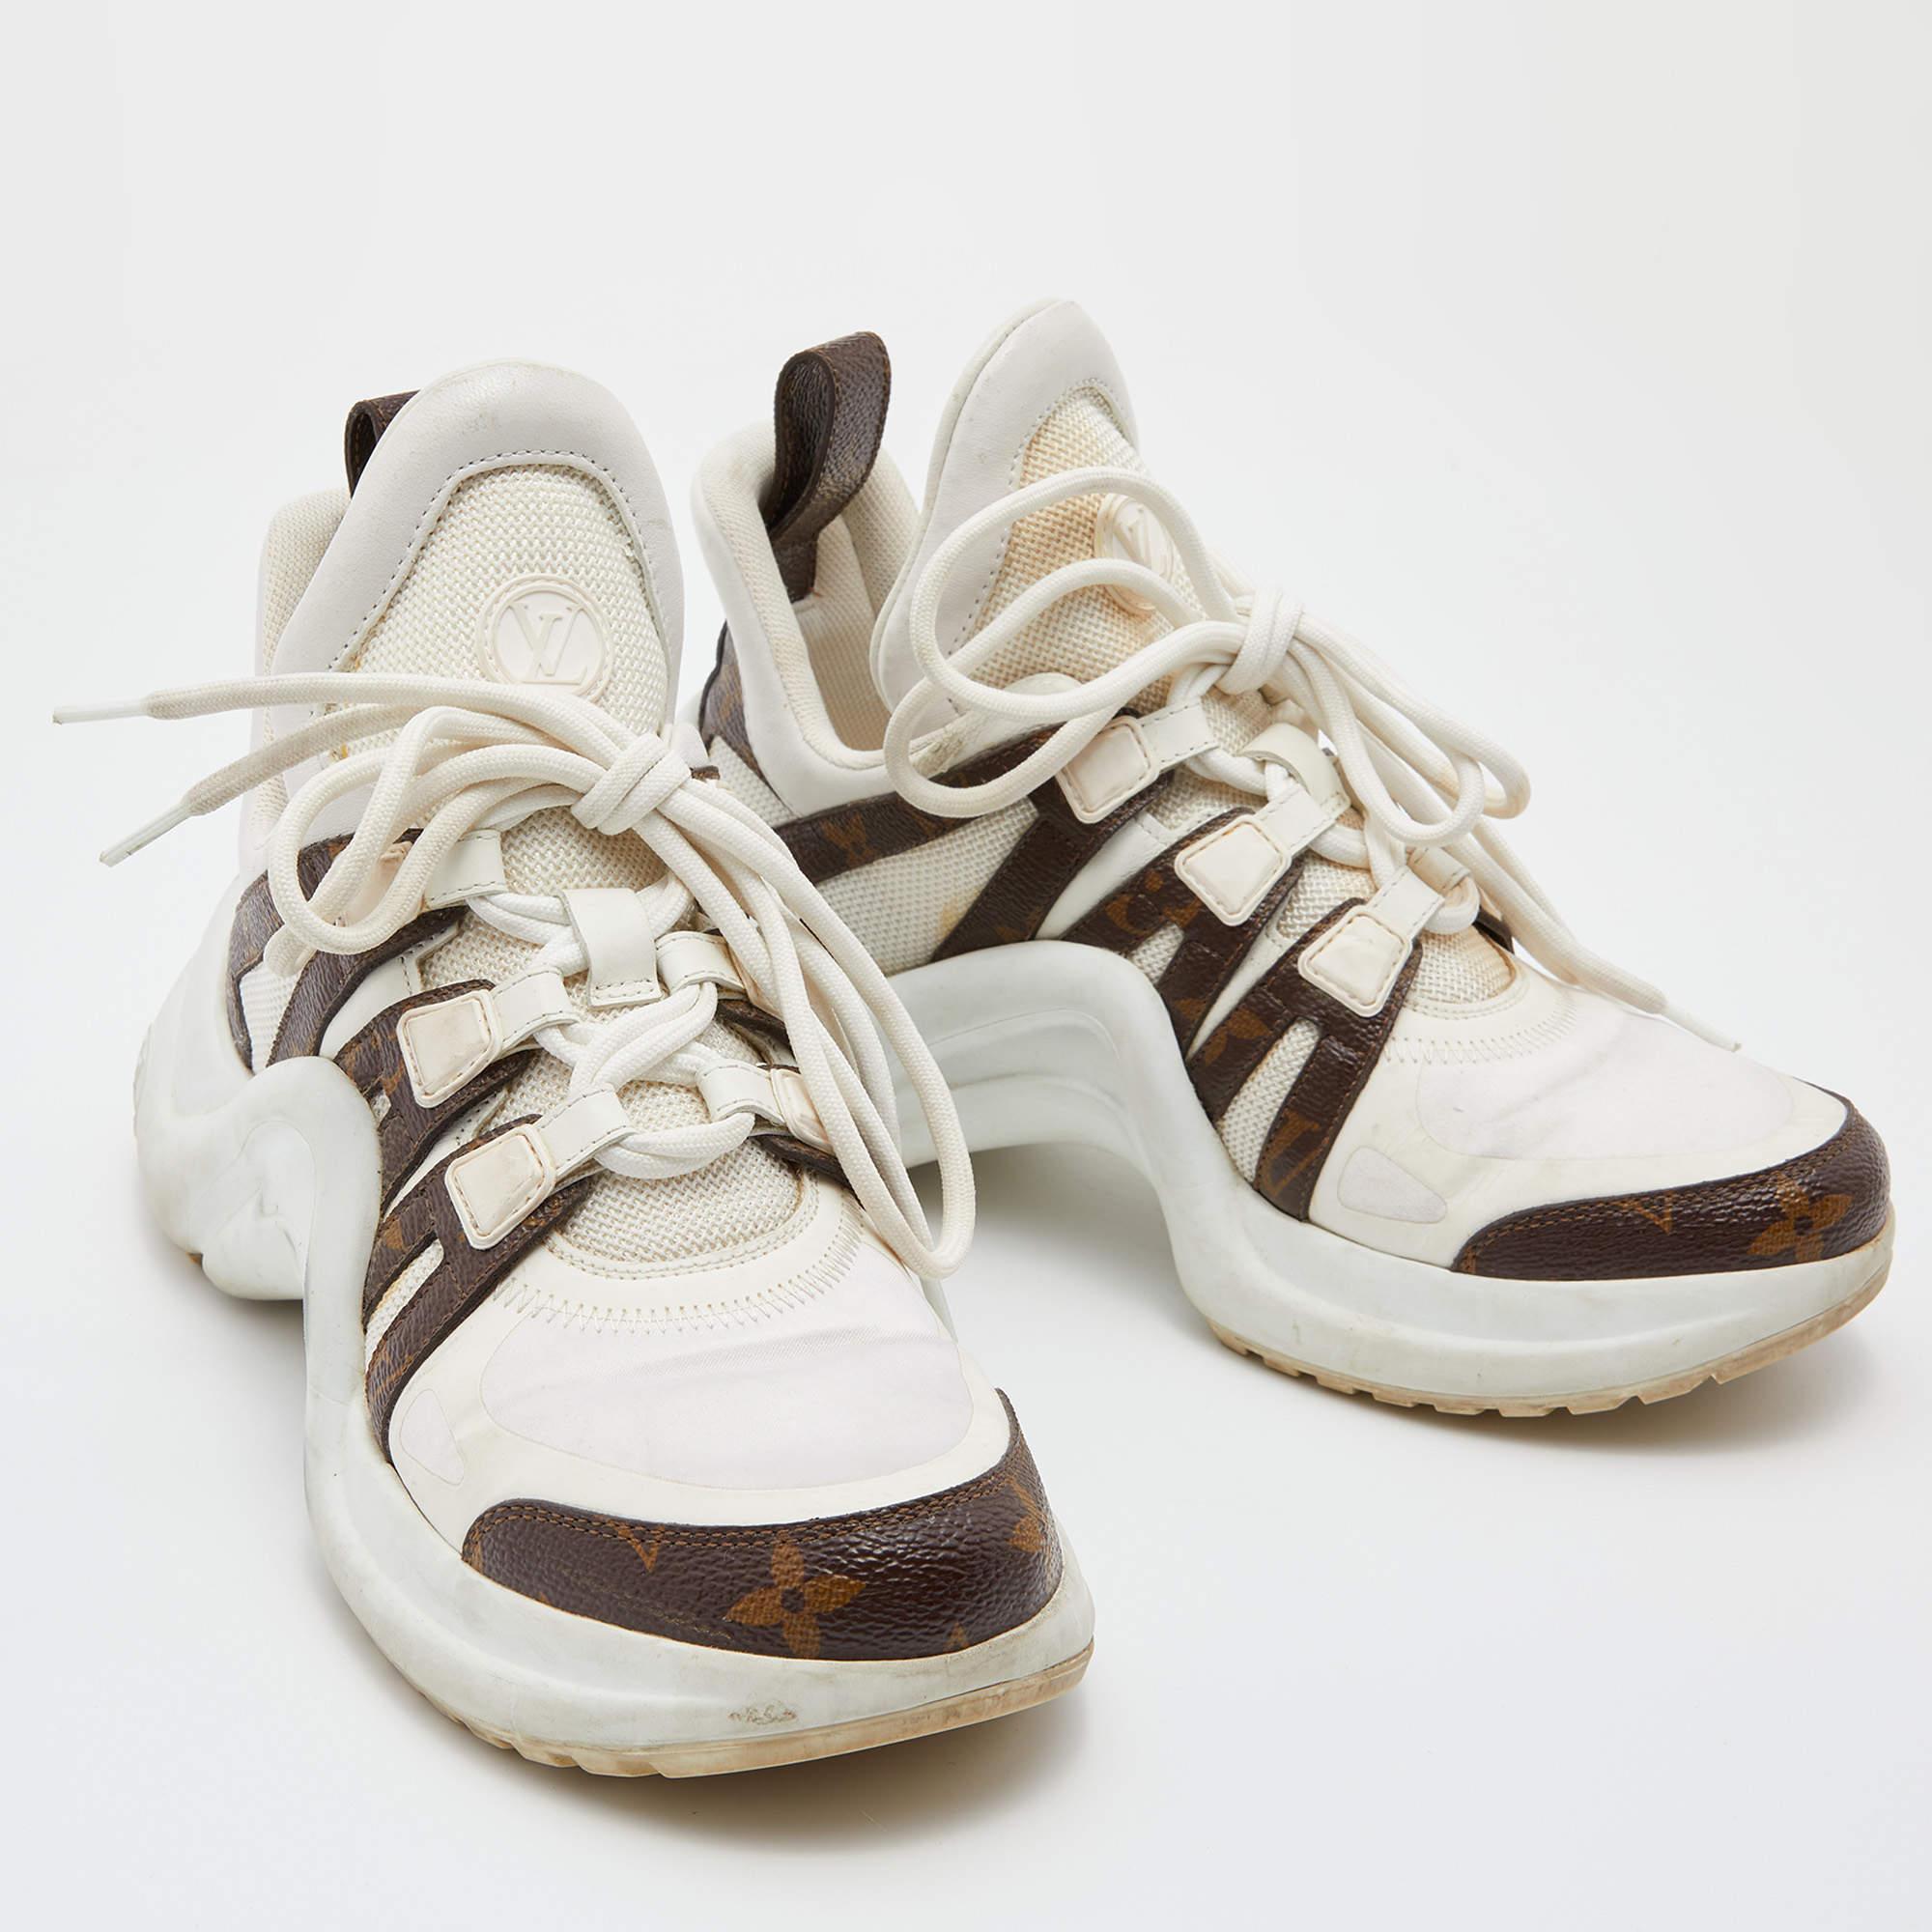 Women's Louis Vuitton White Leather and Monogram Canvas Archlight Sneakers Size 36.5